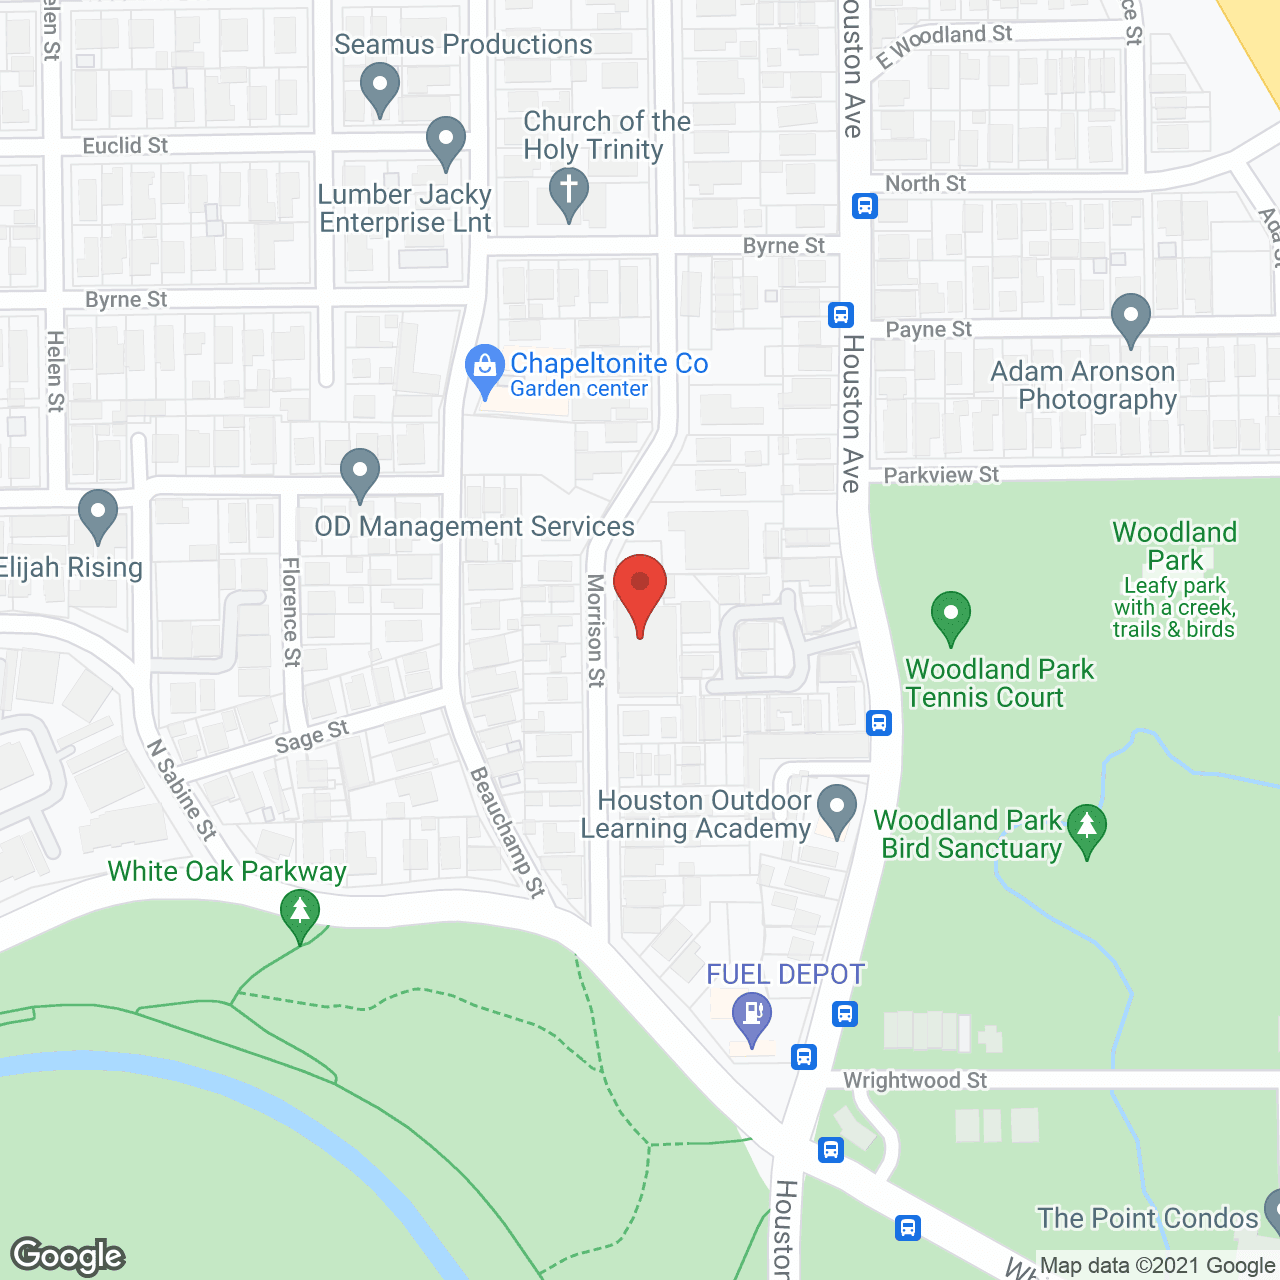 Highland Park Care Ctr in google map